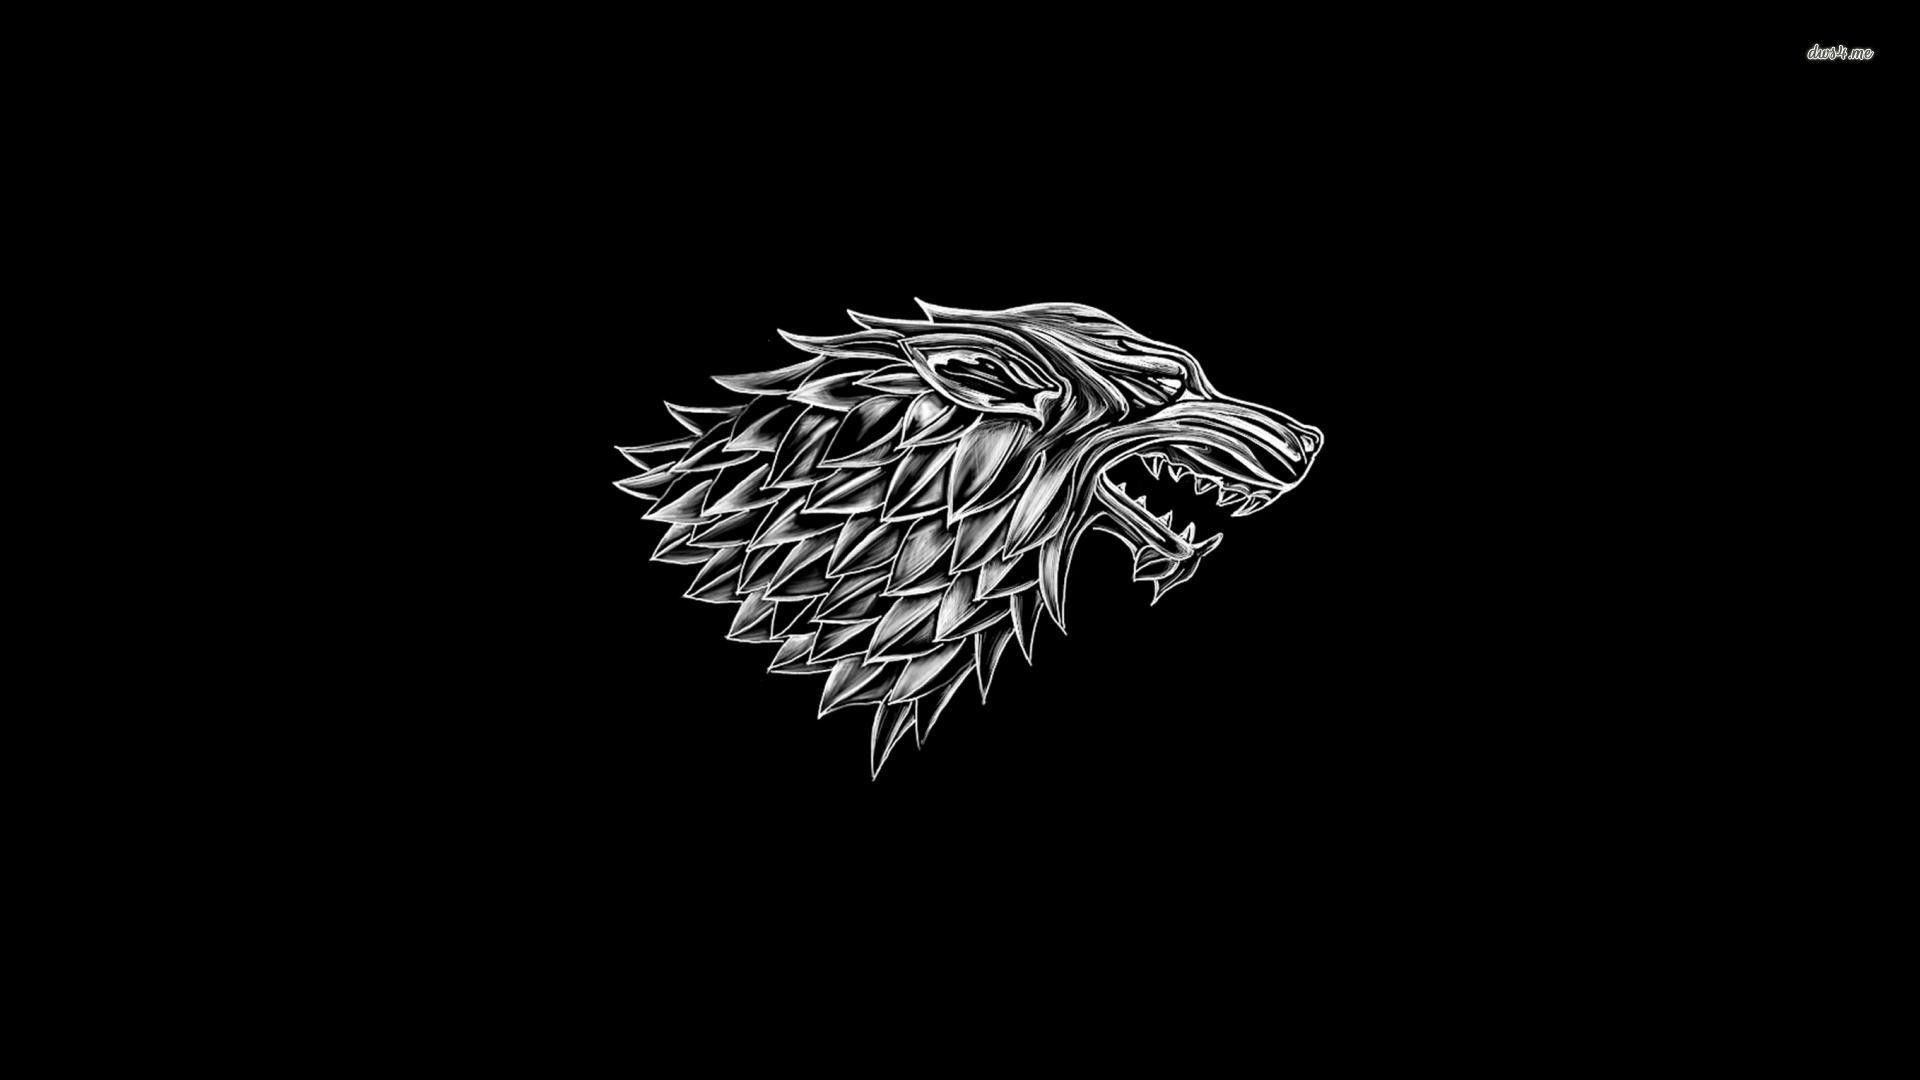 House Stark logo in Game of Thrones wallpaper – TV Show wallpapers .